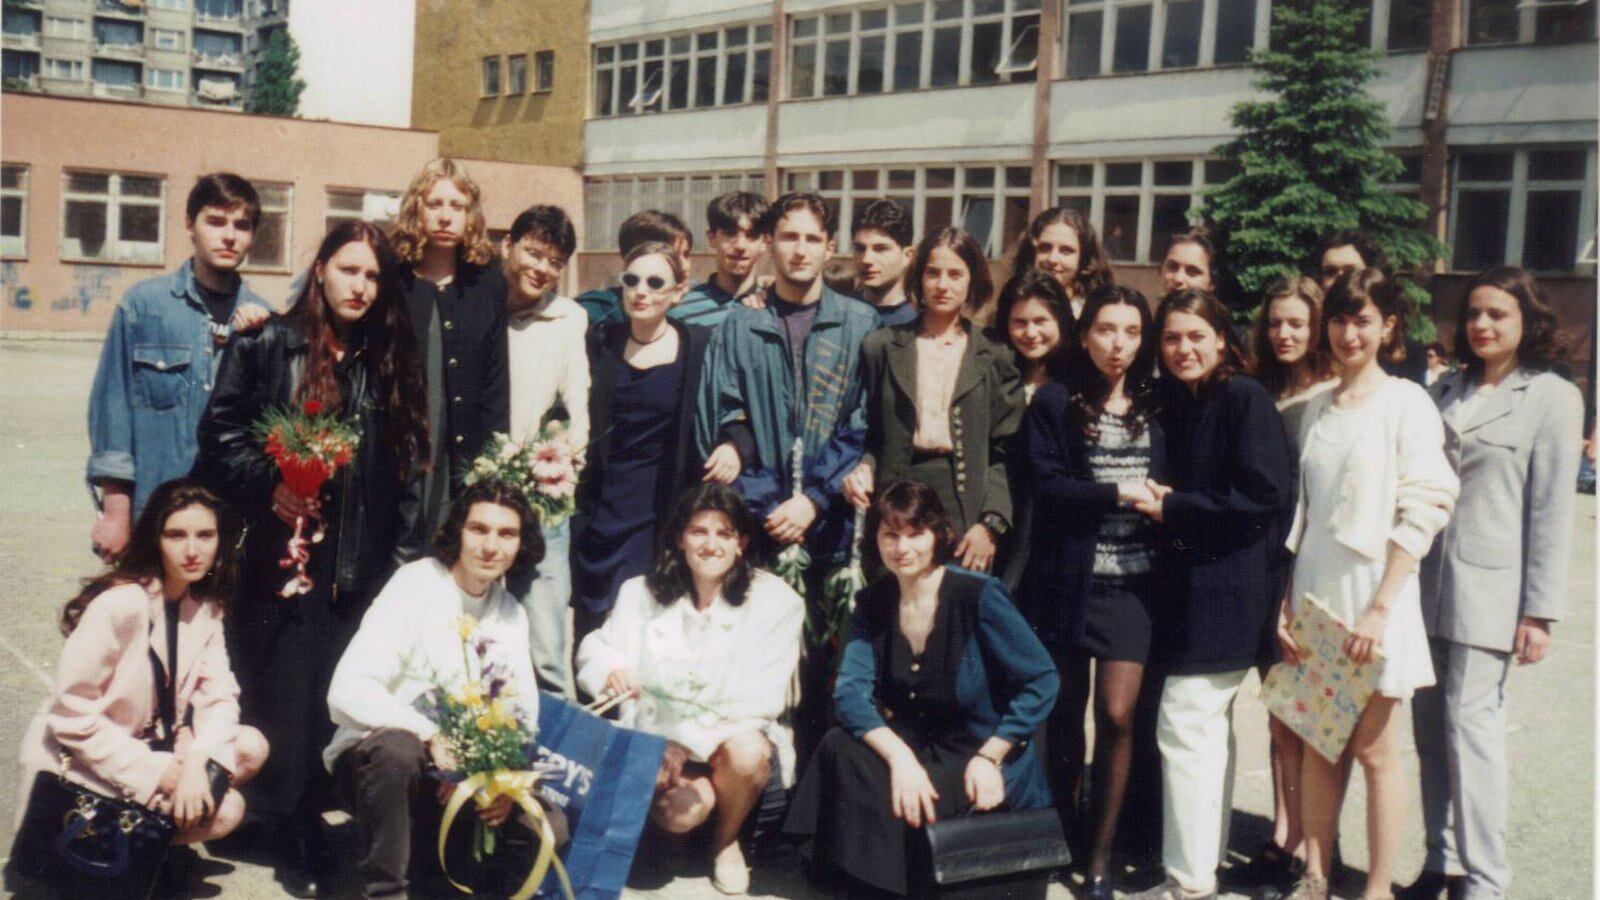 Chalkbeat Chicago reporter Mila Koumpilova (pictured second from right in a white dress) at age 18 with her class in front of her high school in Sofia, Bulgaria.